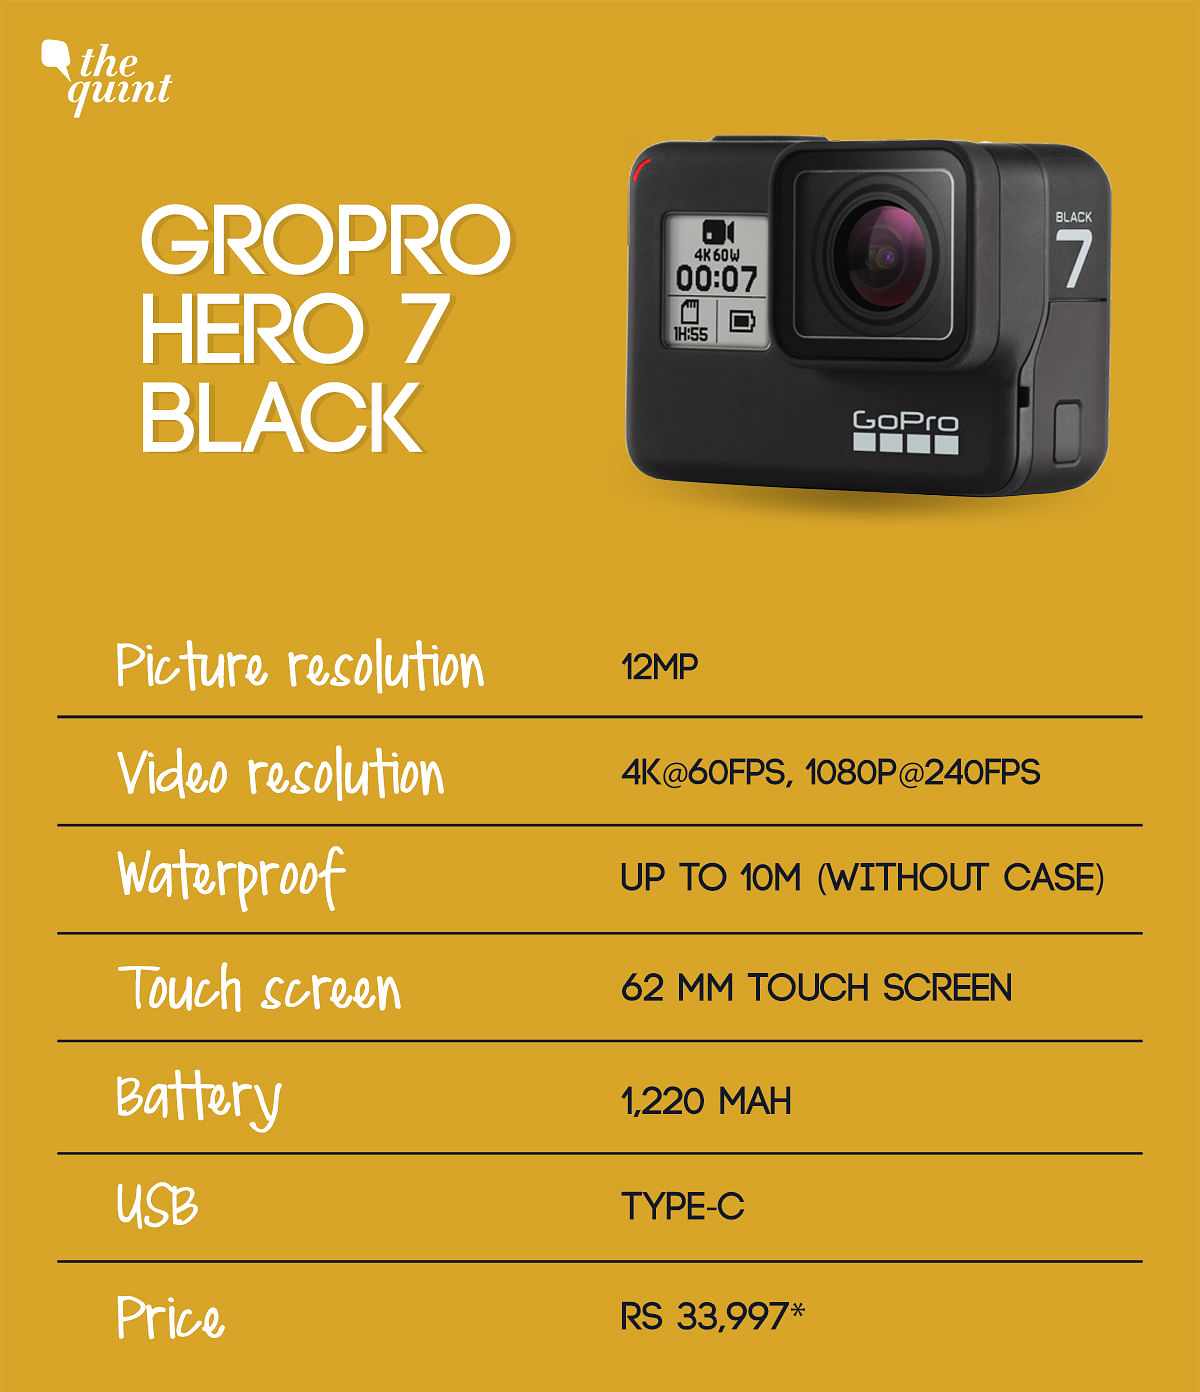 Which is the best action camera for you? GoPro Hero 7 Black or  SJ Cam SJ5000x from different budget segments.